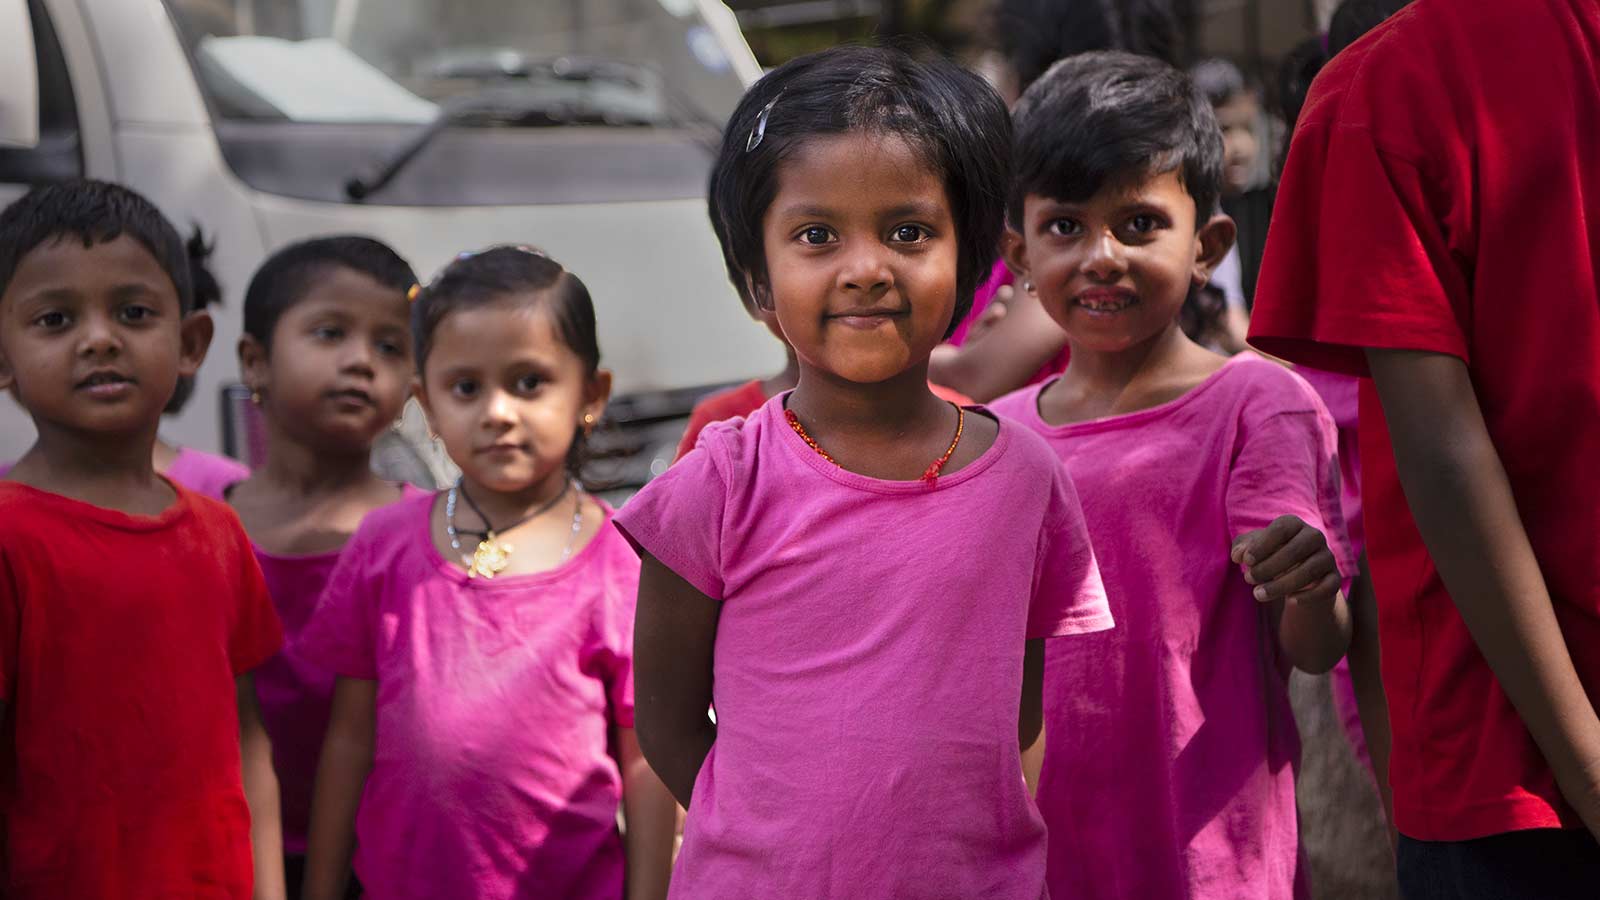 group of sponsored children in india wearing pink and red shirts